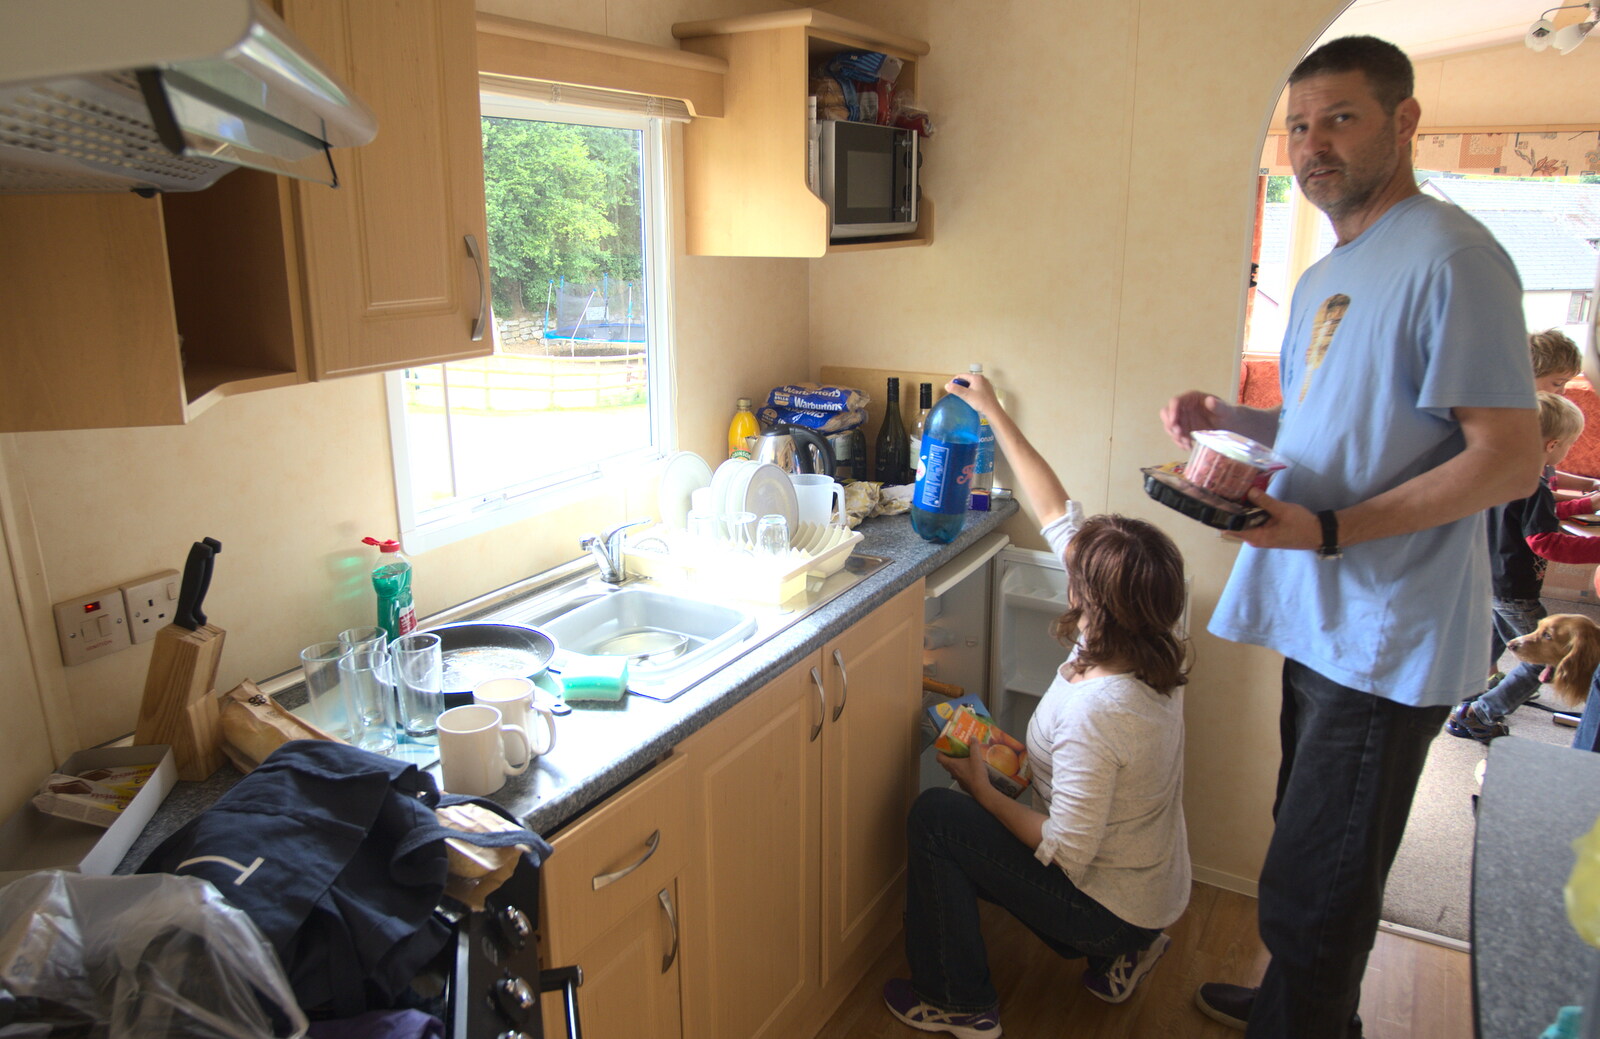 Michelle and Sean in the caravan kitchen from Camping With Sean, Ashburton, Devon - 8th August 2016